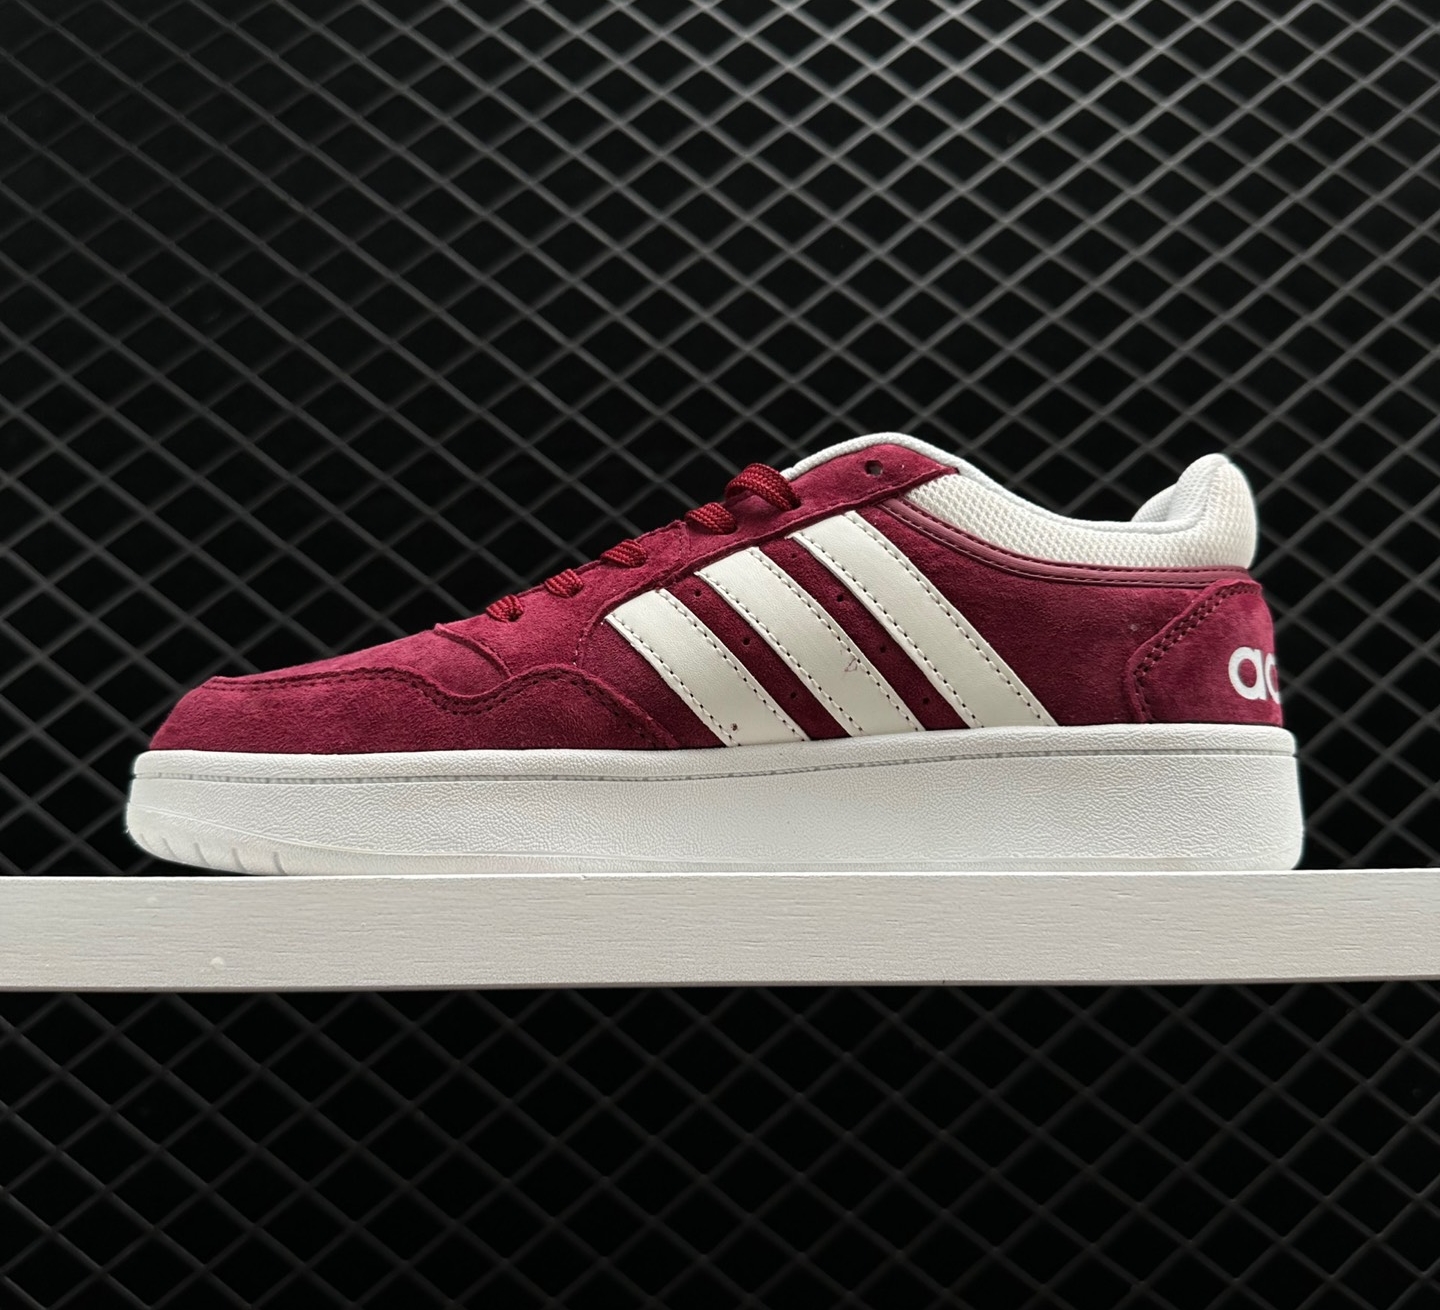 Adidas Neo Hoops 3.0 Basketball Shoes - Brownish Red Color | Shop Now